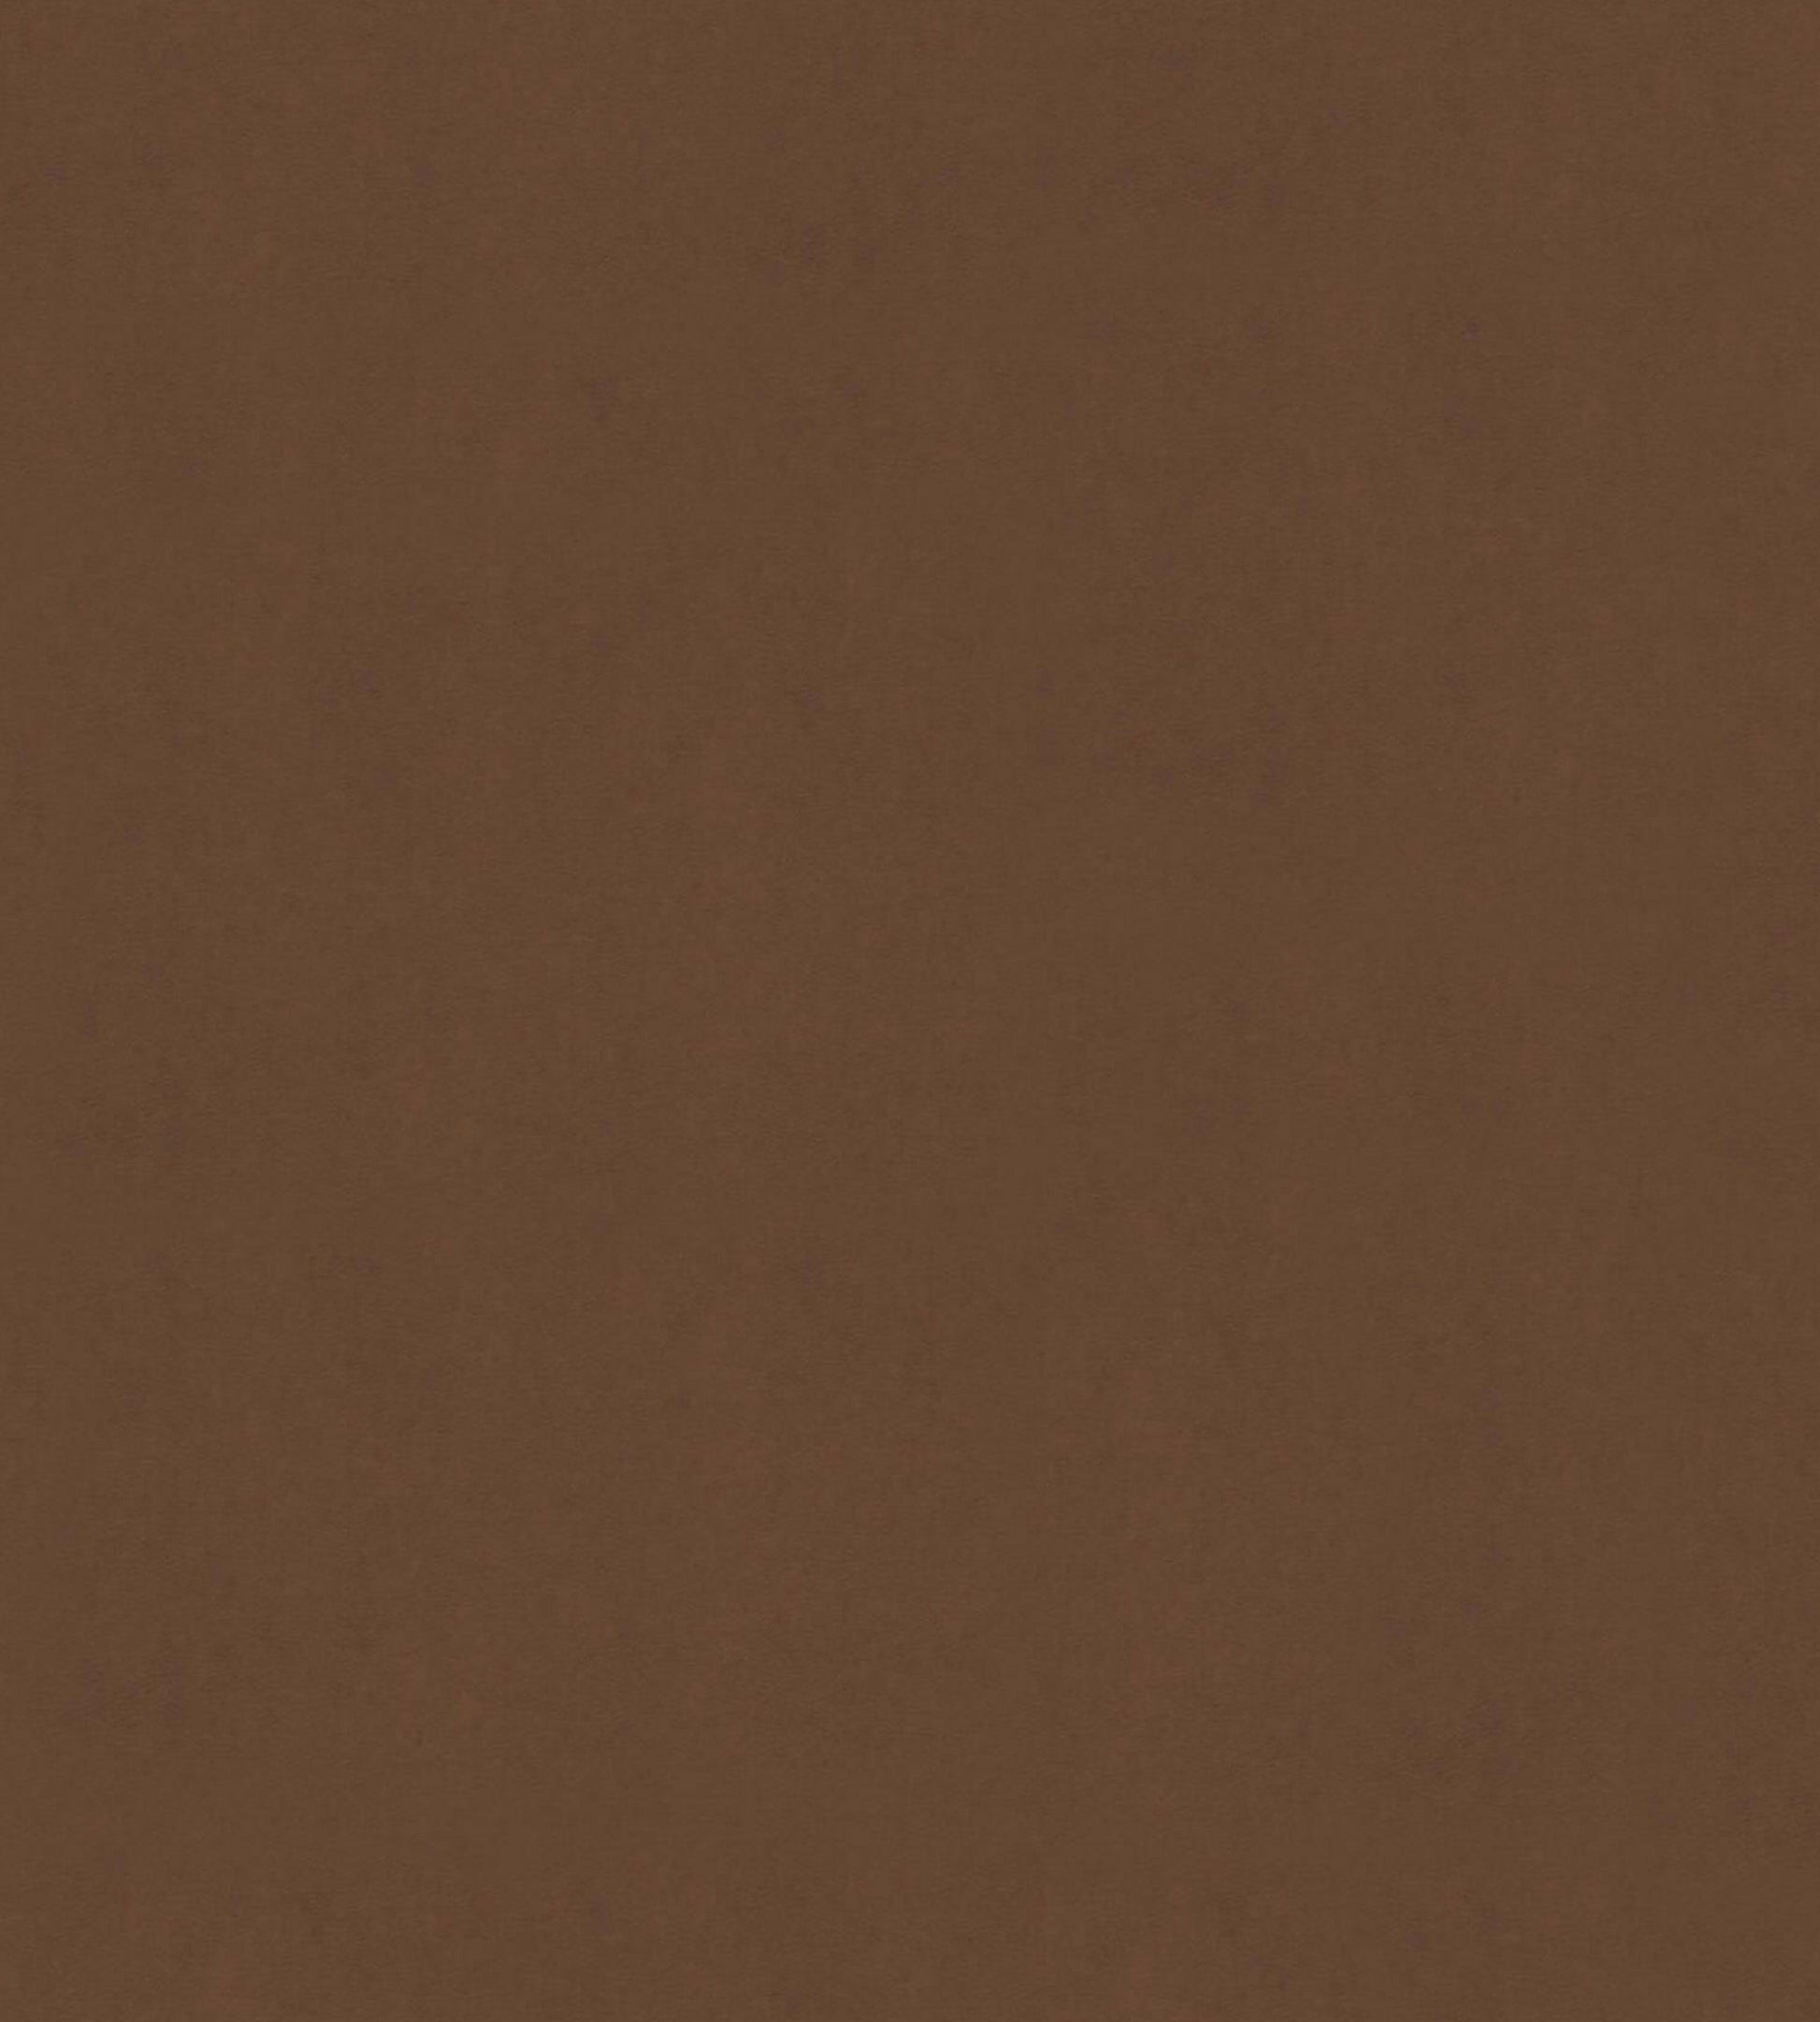 Purchase Old World Weavers Fabric Pattern number AB 90641000, Sensuede Cocoa 1